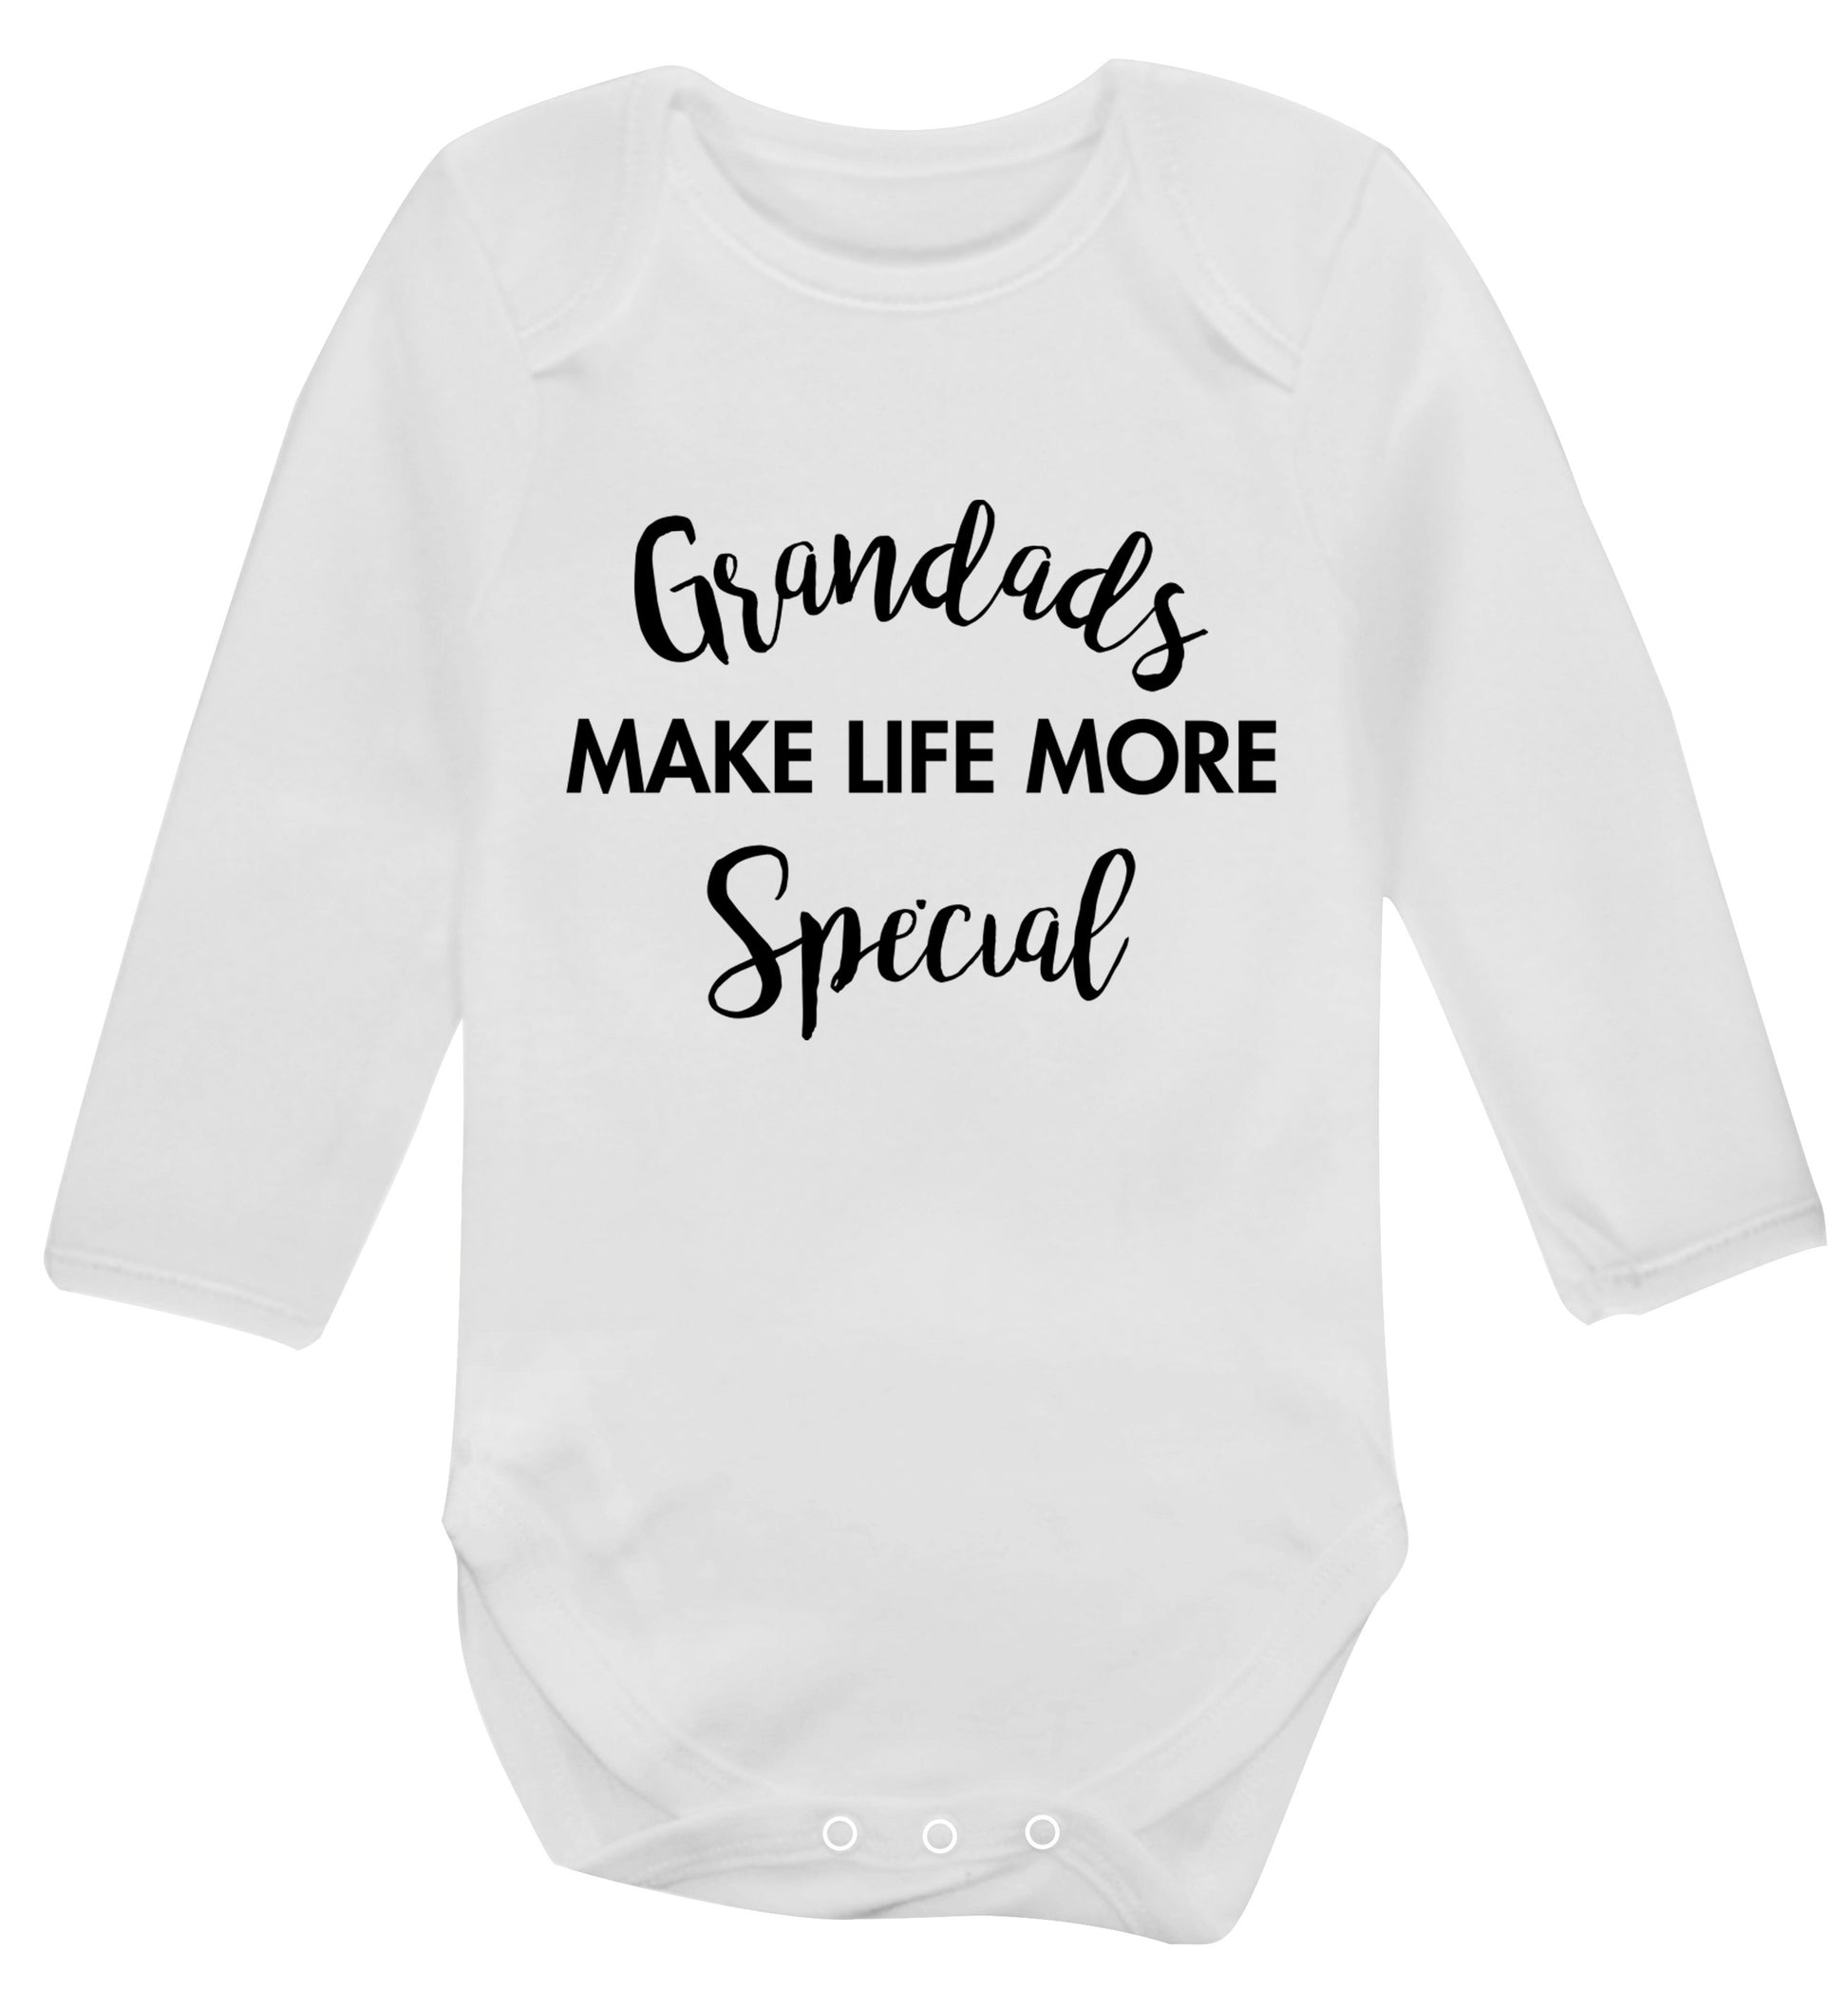 Grandads make life more special Baby Vest long sleeved white 6-12 months